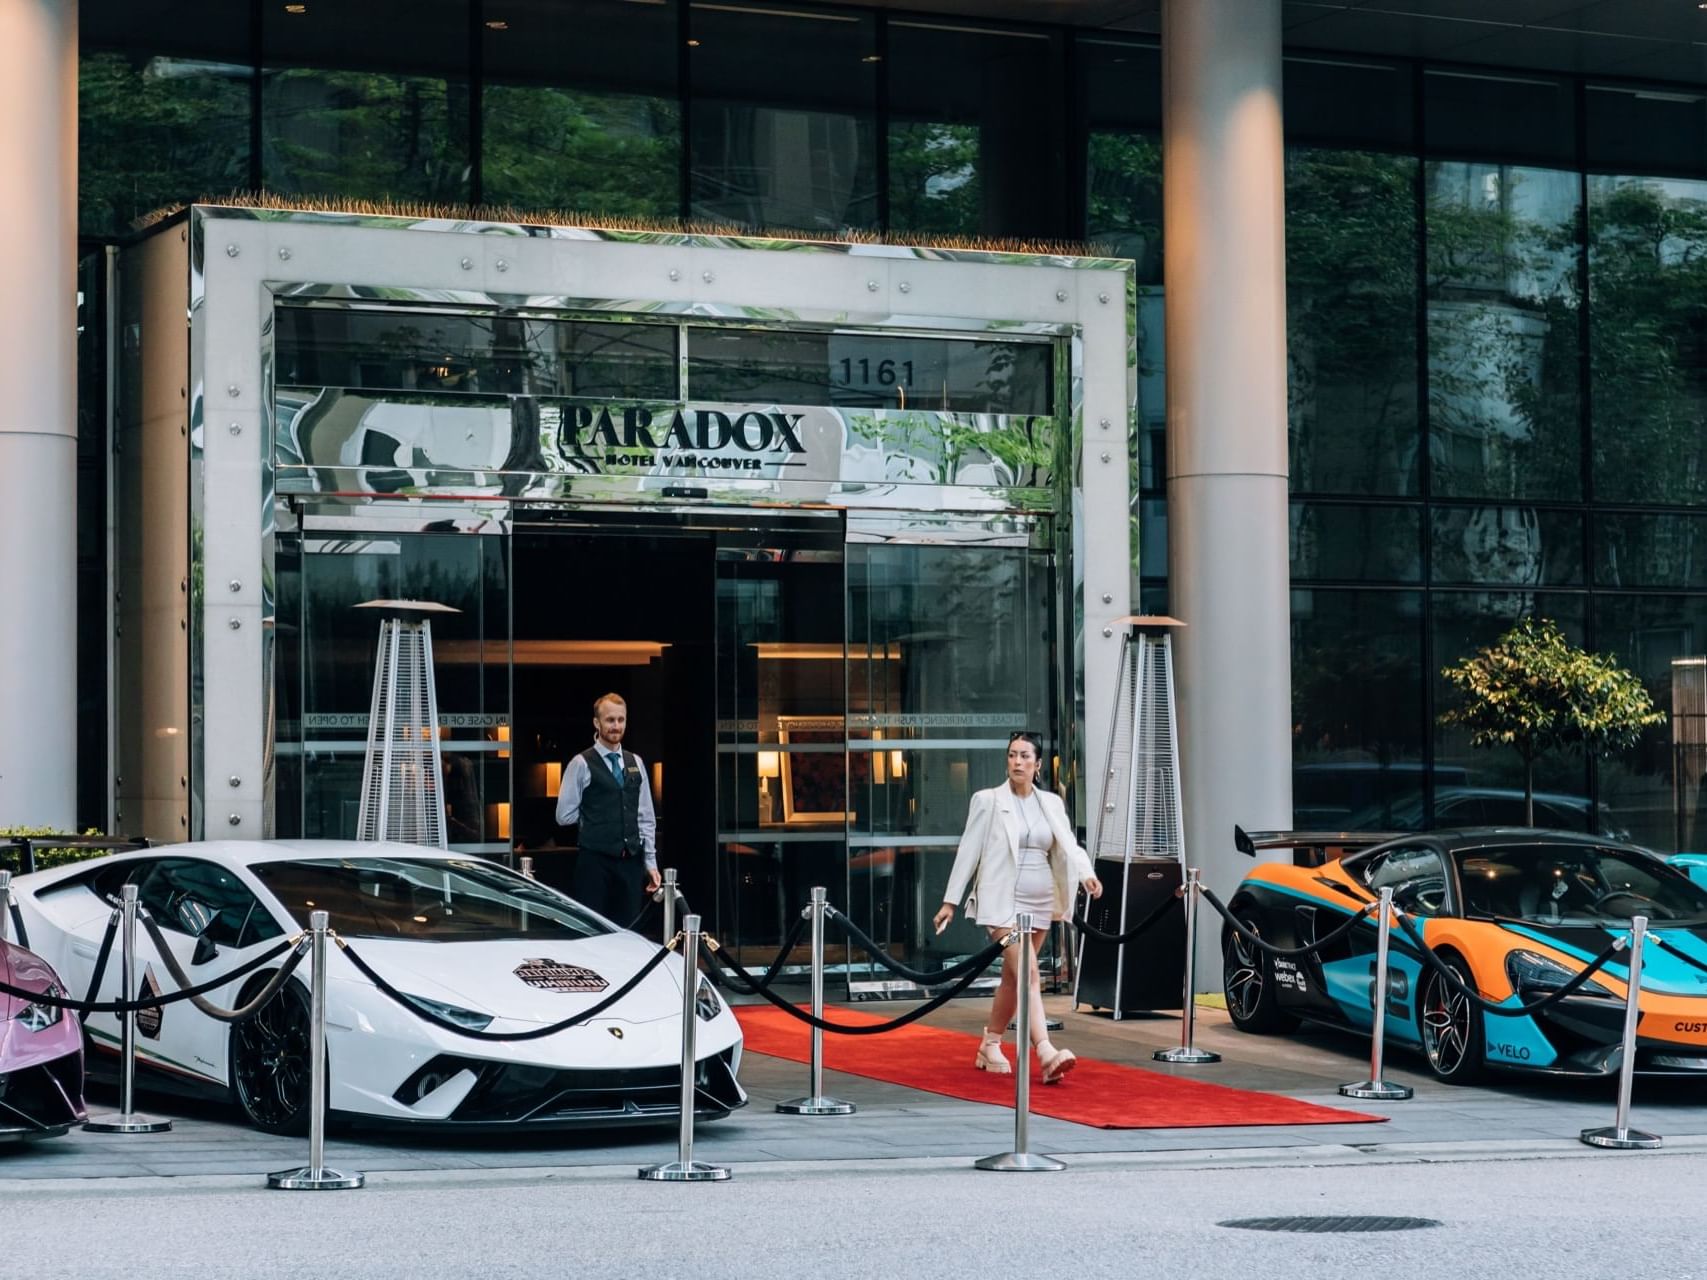 Entrance to Paradox Hotel with lots of supercars outfront